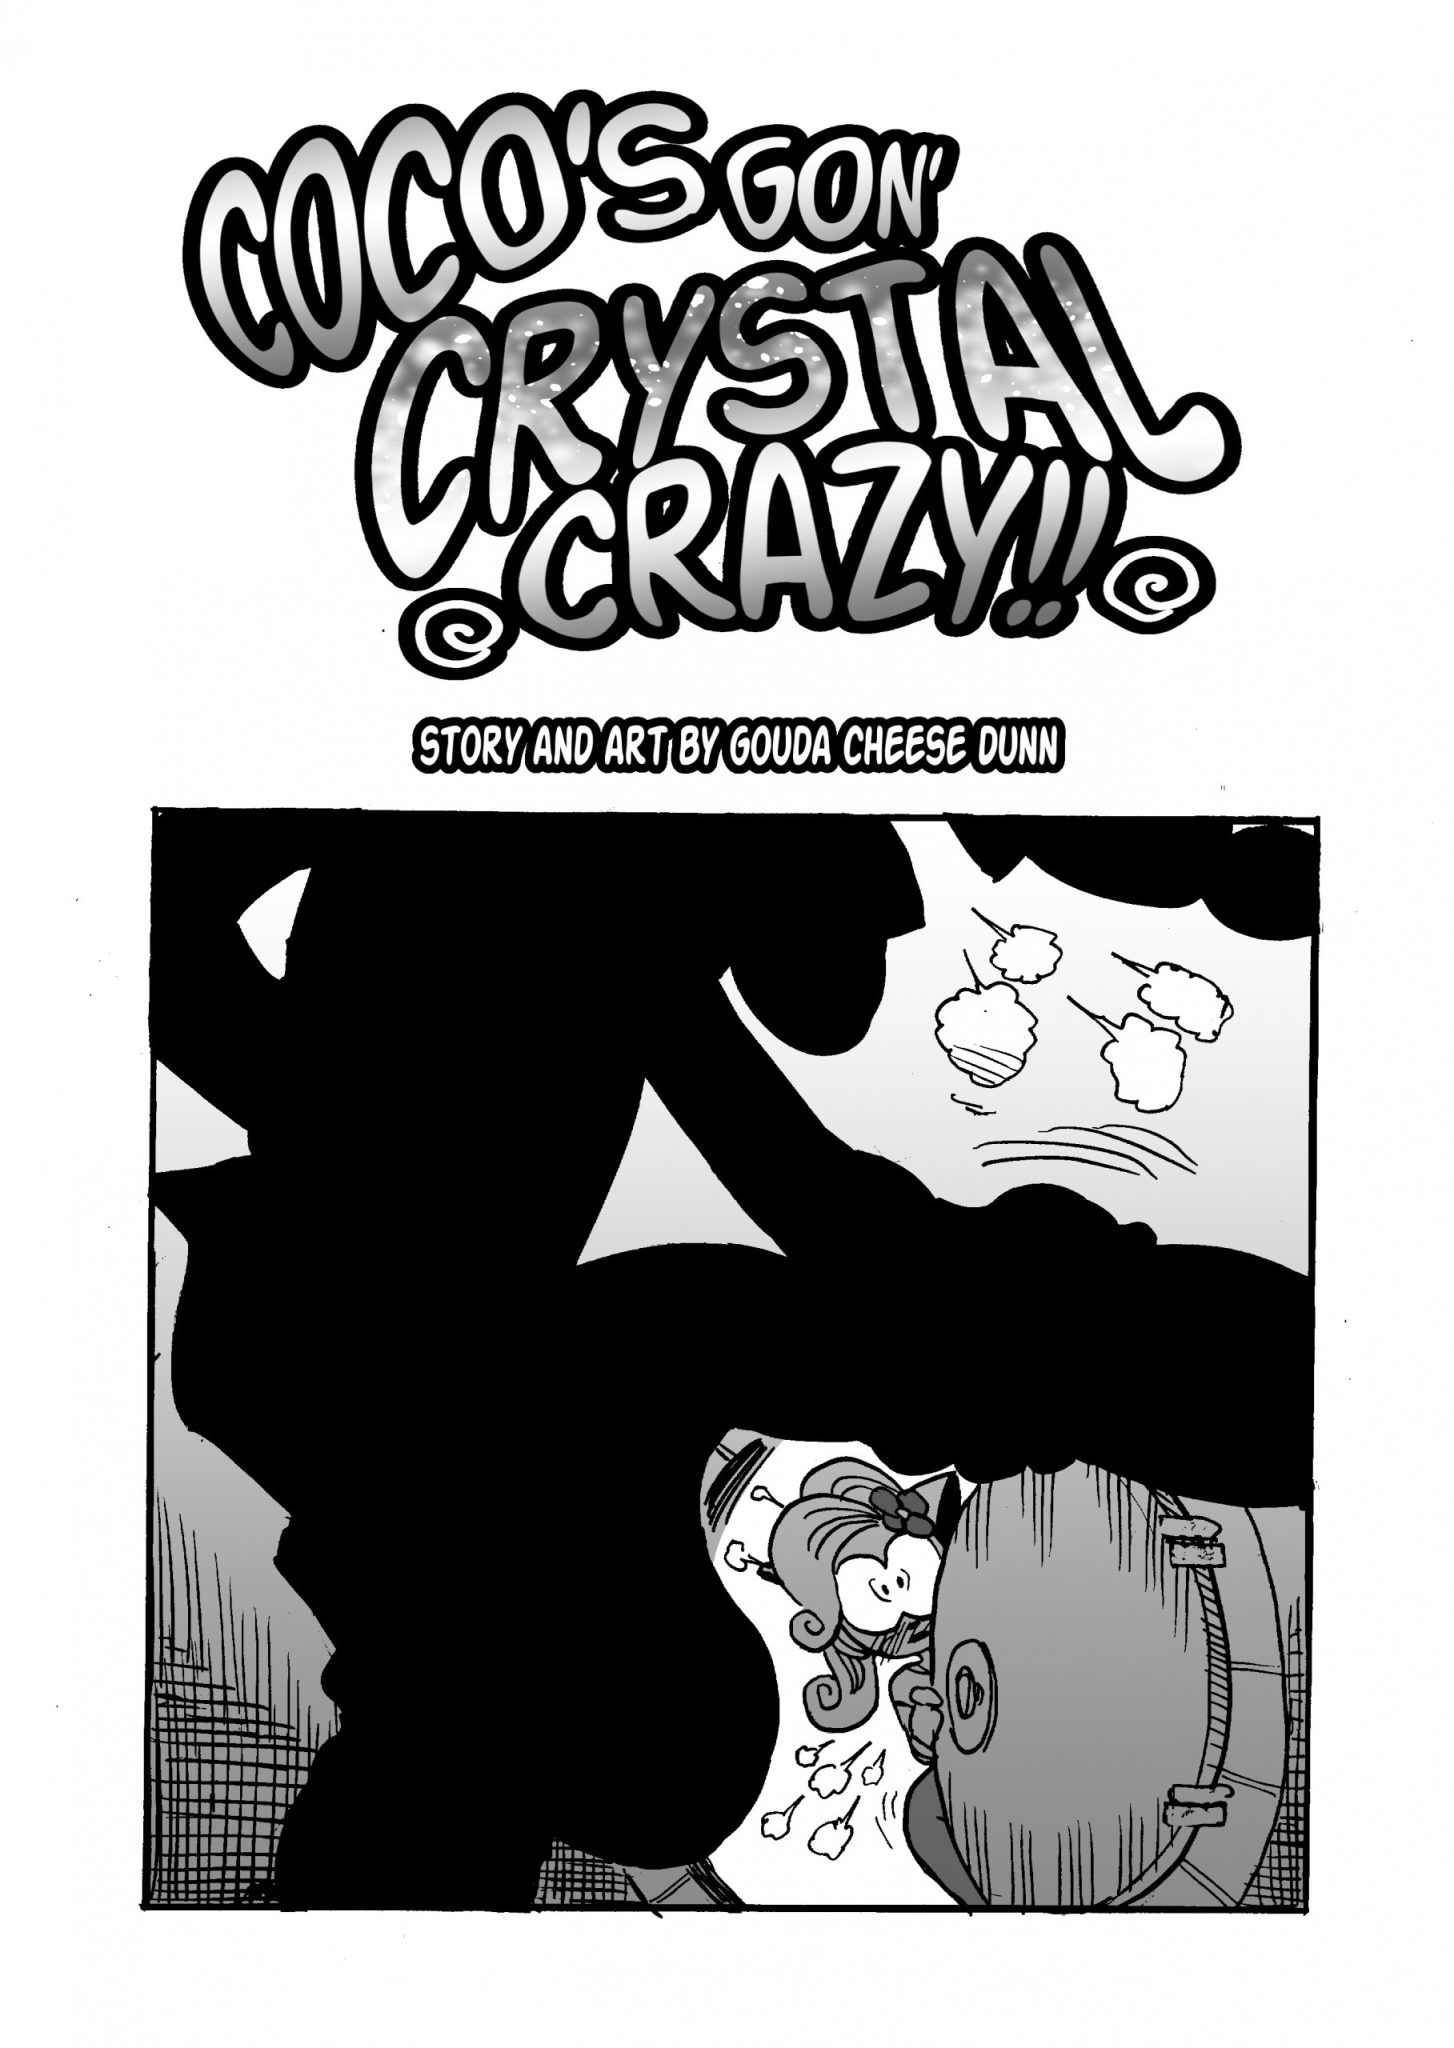 Coco’s Gon’ Crystal Crazy